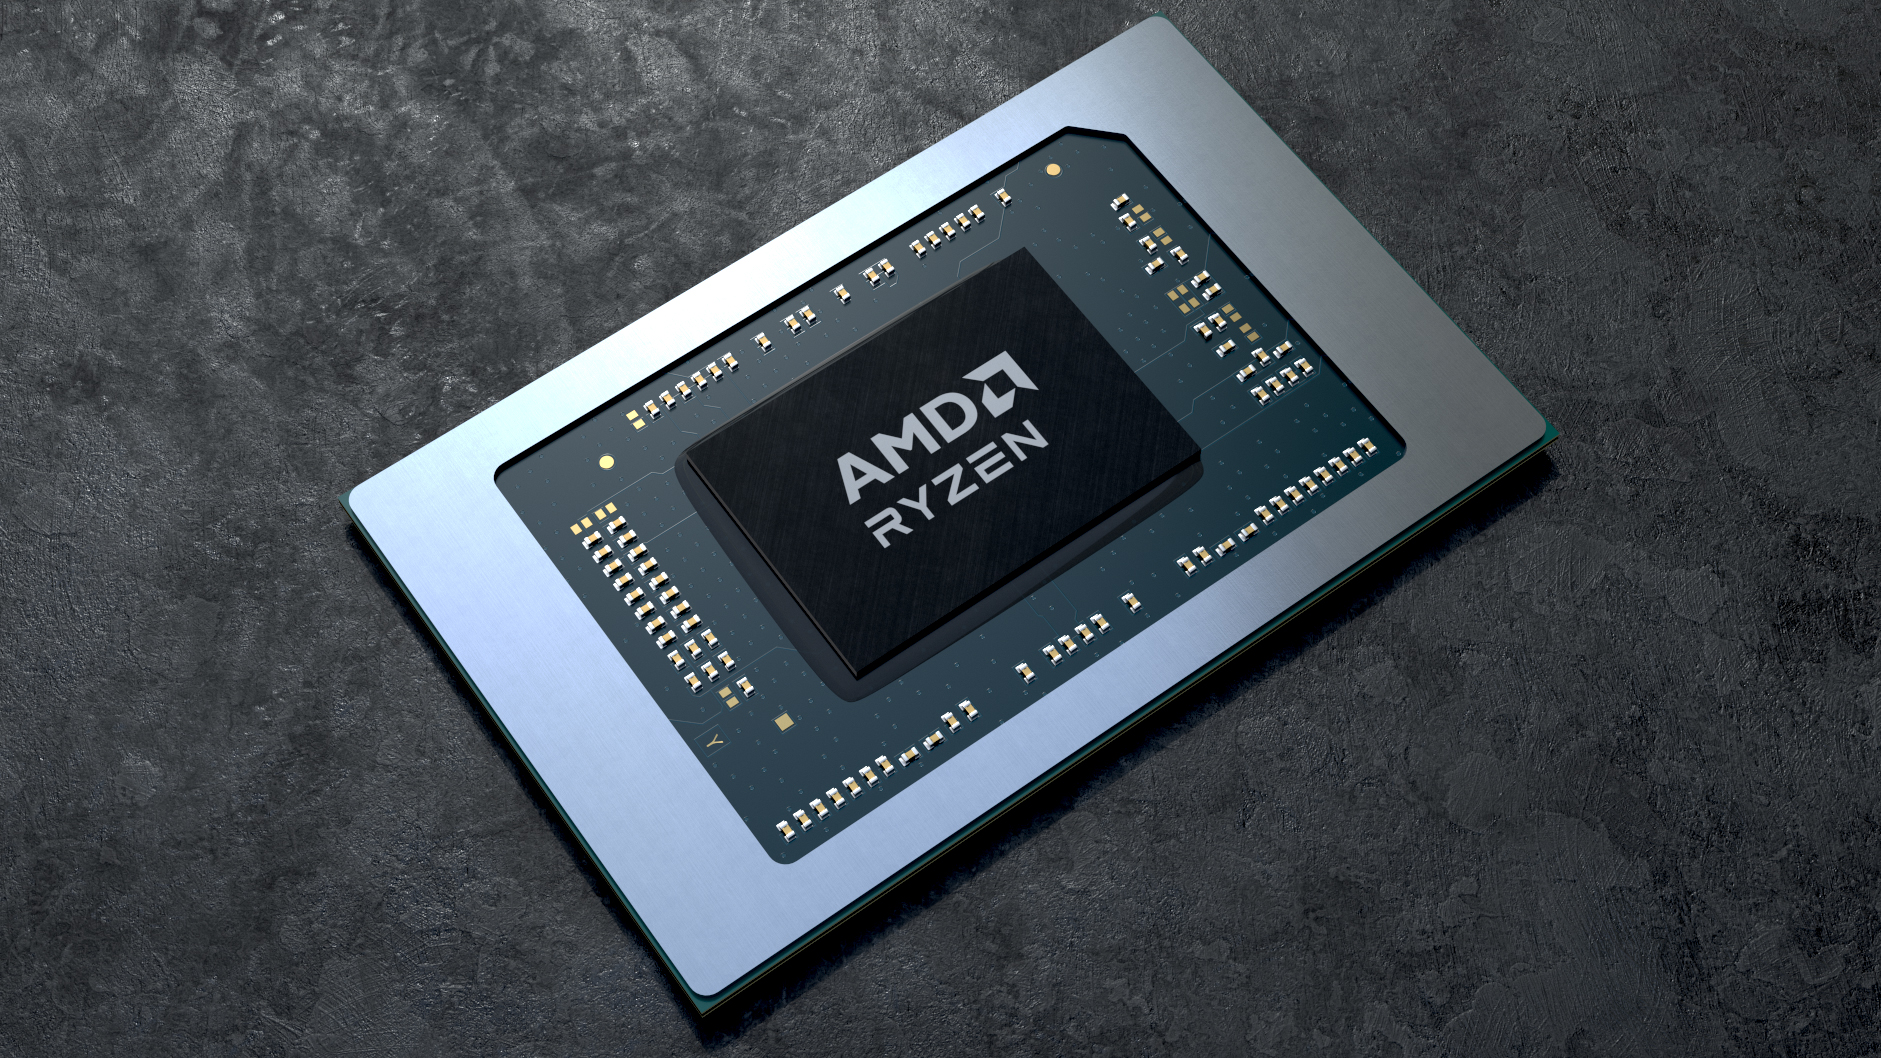 AMD Ryzen 5 8600G review: The only affordable gaming CPU you